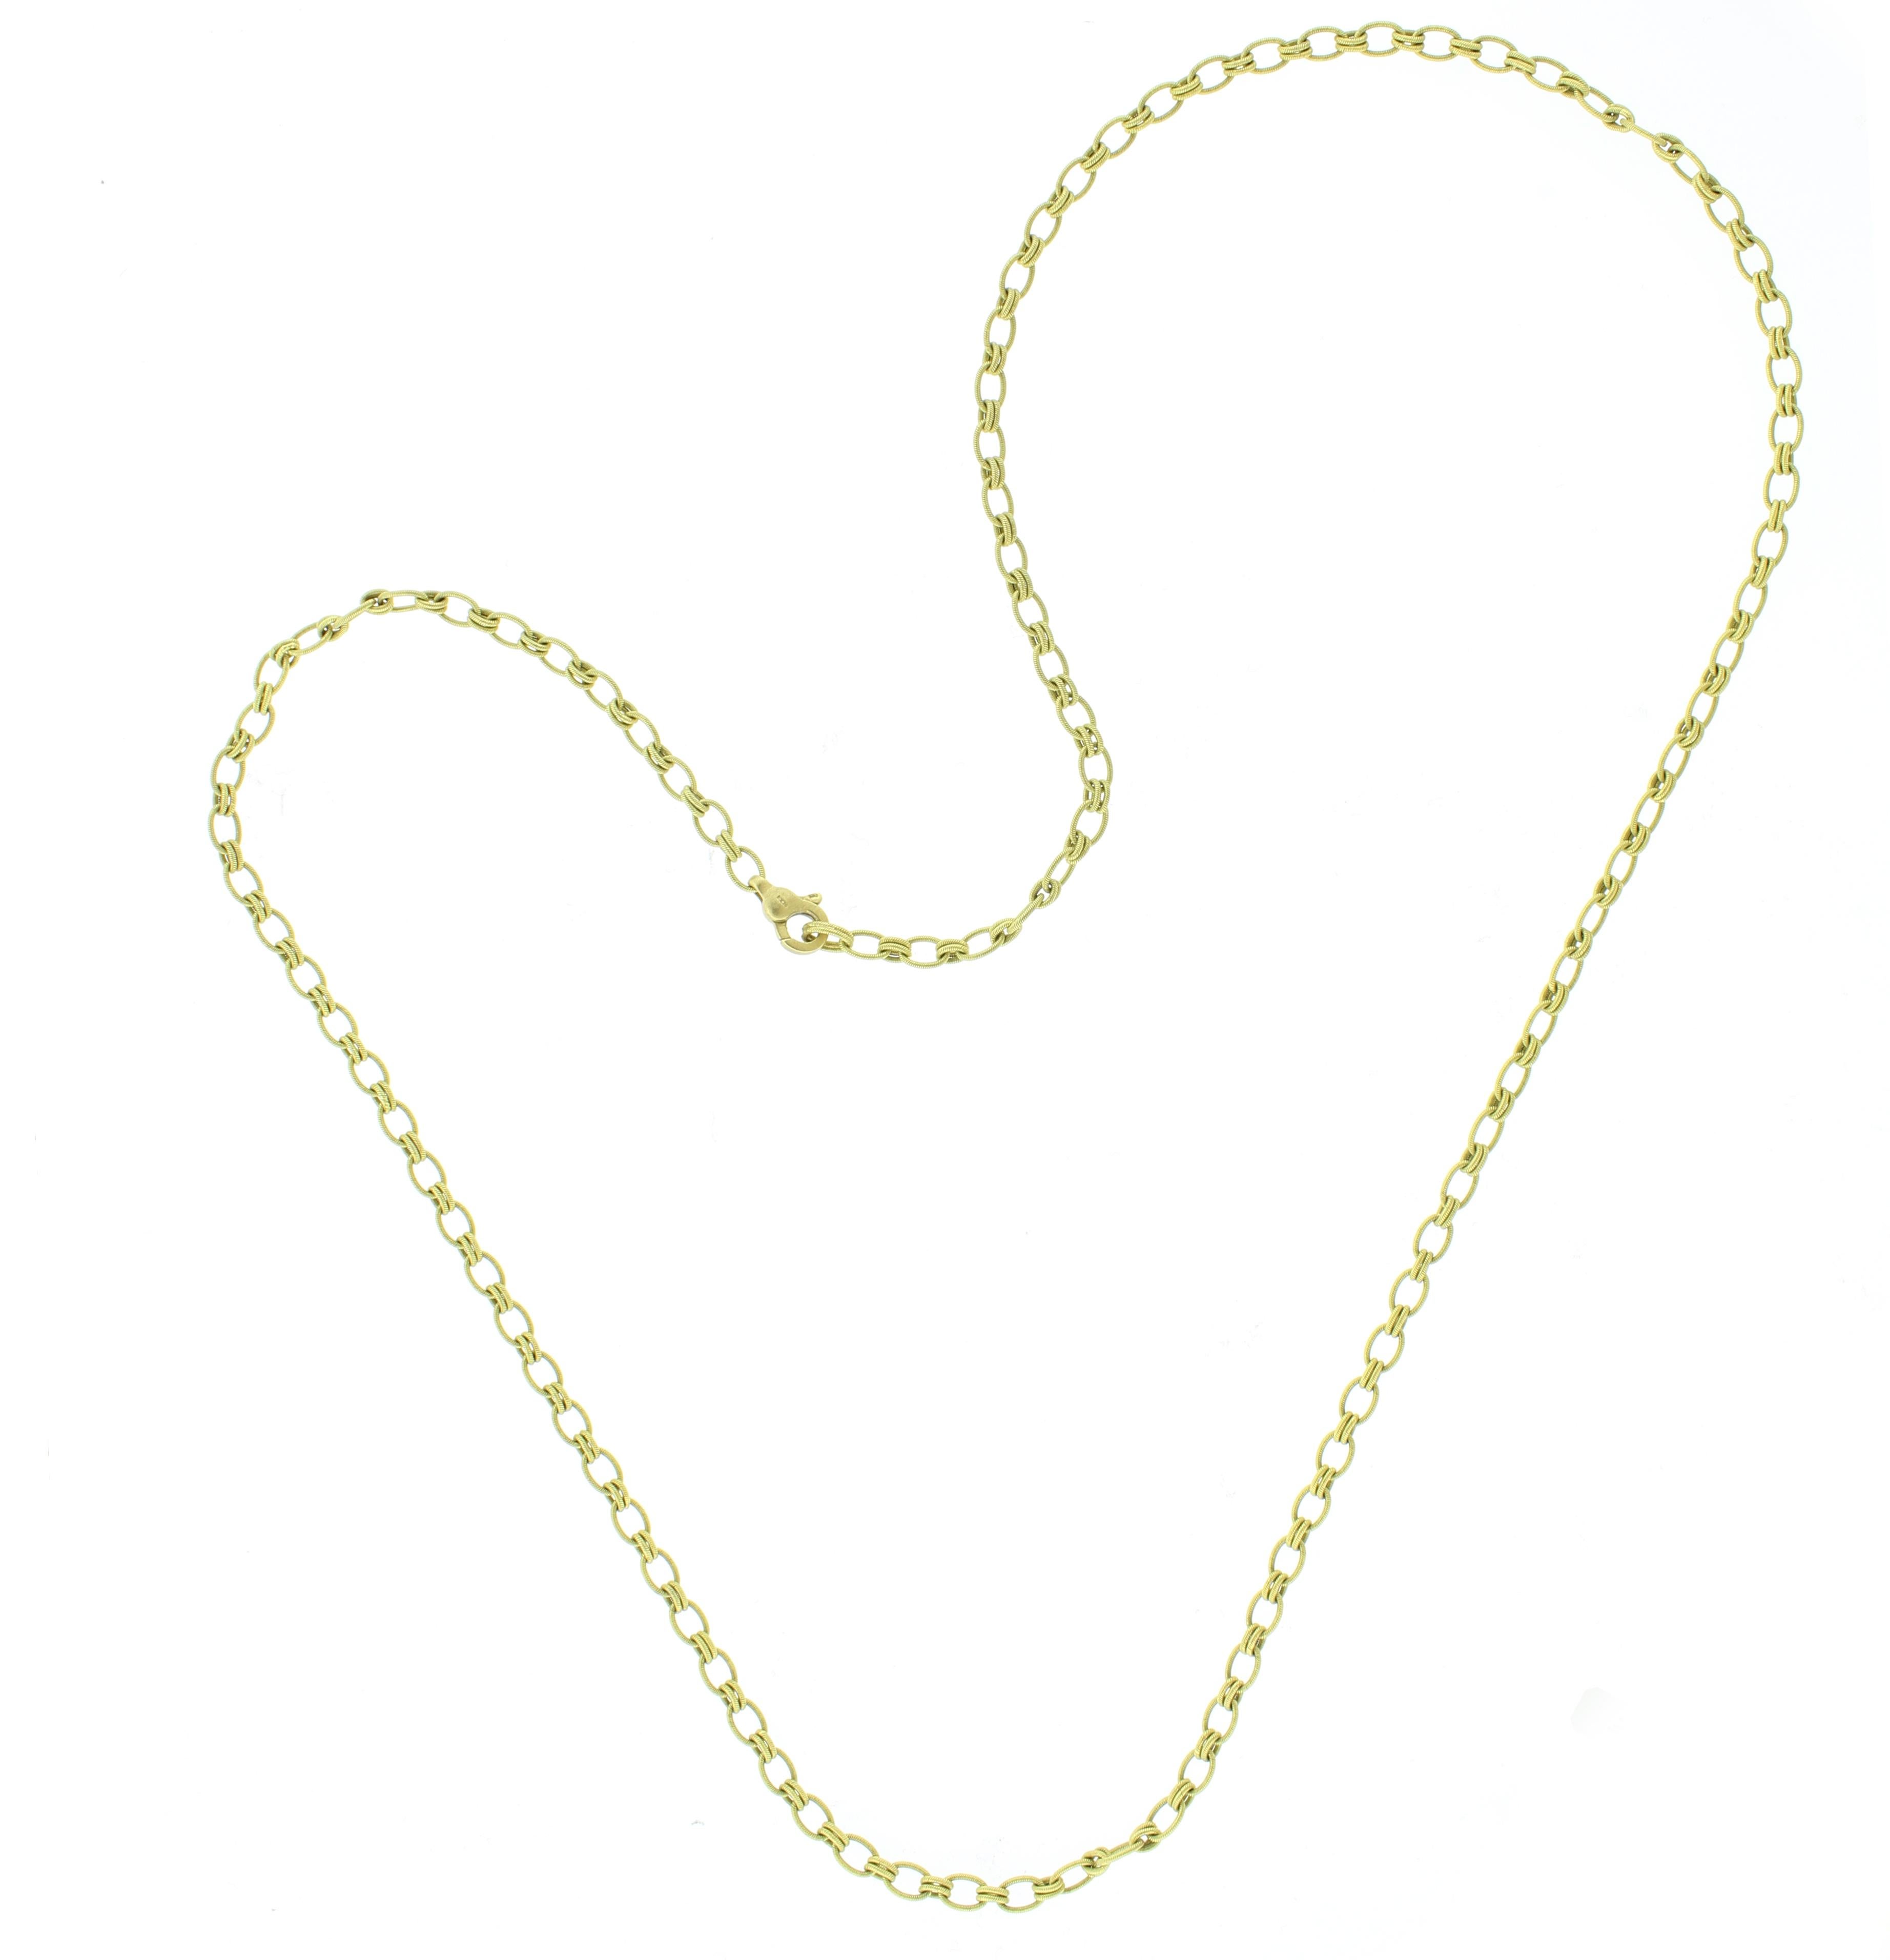 From Buccellati, this chain necklace can be worn long or doubled up.  
♦ Designer: Buccellati
♦ Metal: 18kt yellow gold
♦ Length: 32 inches
♦ Weight: 34.8grams
♦ Packaging: Pampillonia Presentation Box
♦ Condition: Excellent, pre-owned.